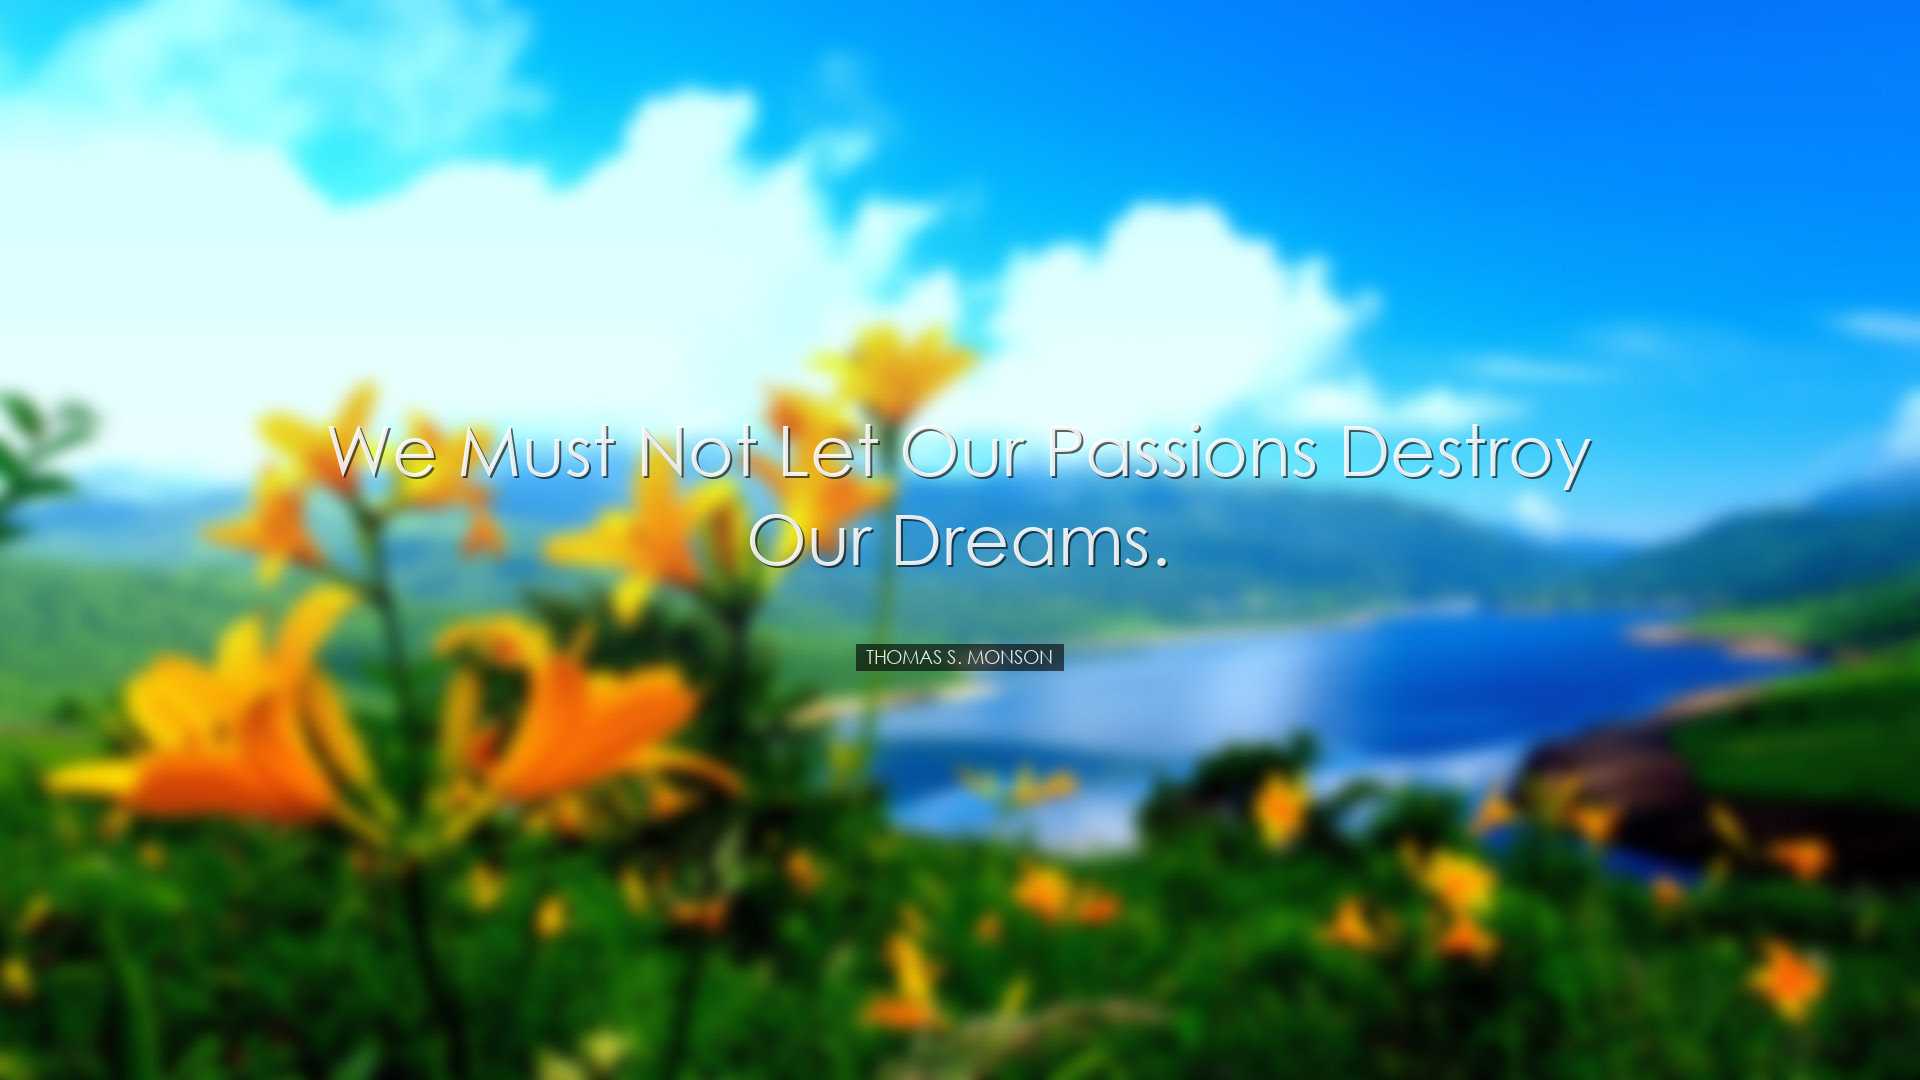 We must not let our passions destroy our dreams. - Thomas S. Monso